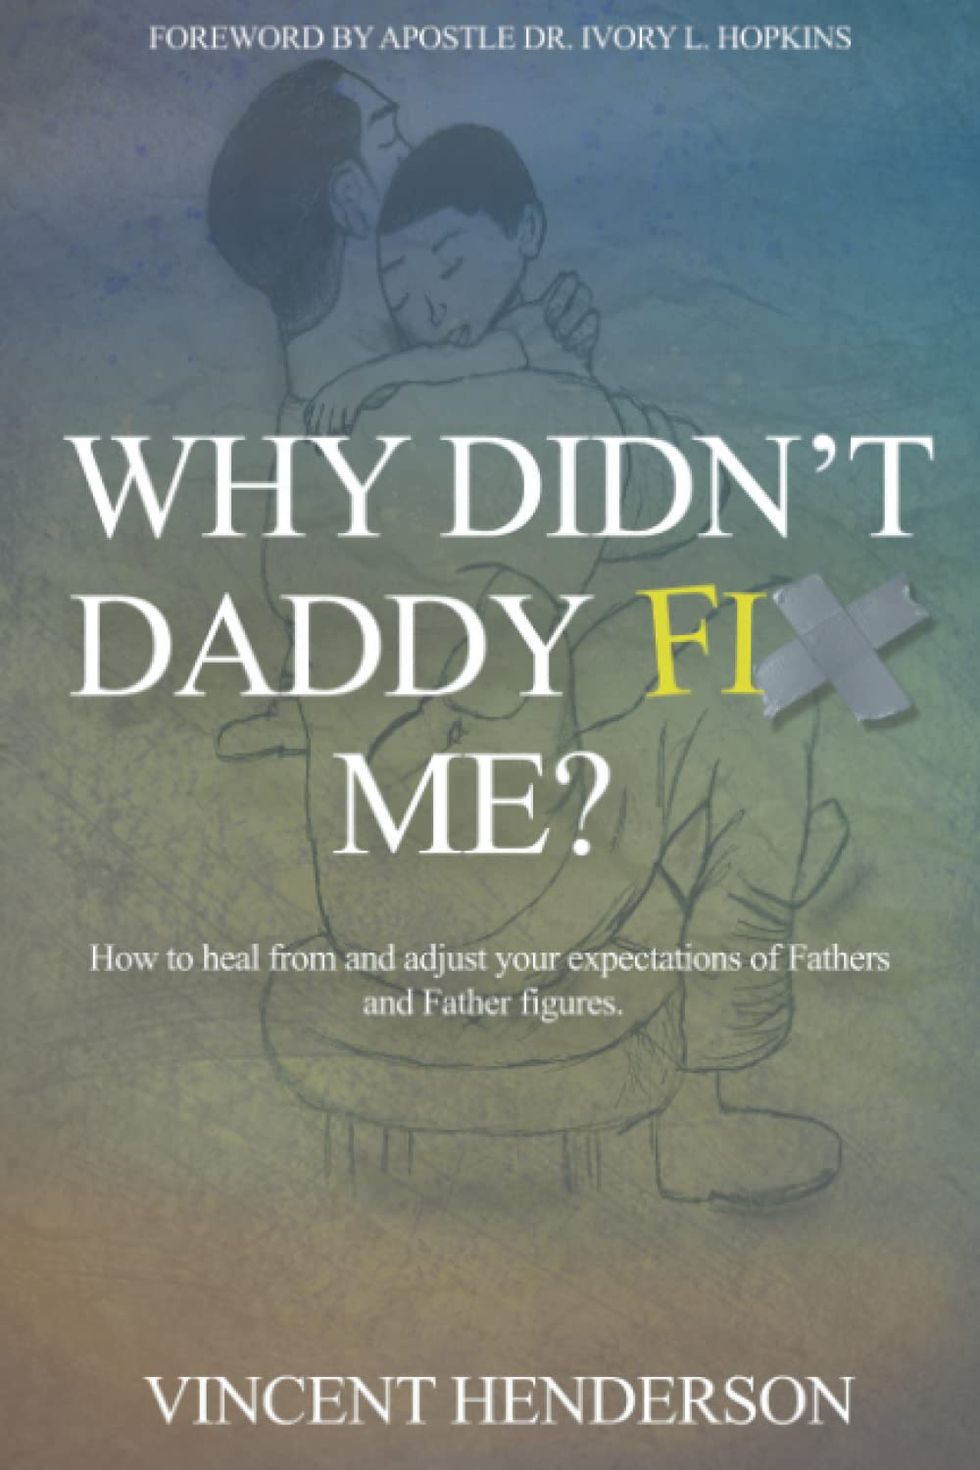 Why Didn't Daddy Fix Me?: How To Heal From and Adjust Your Expectations of Fathers and Father Figures